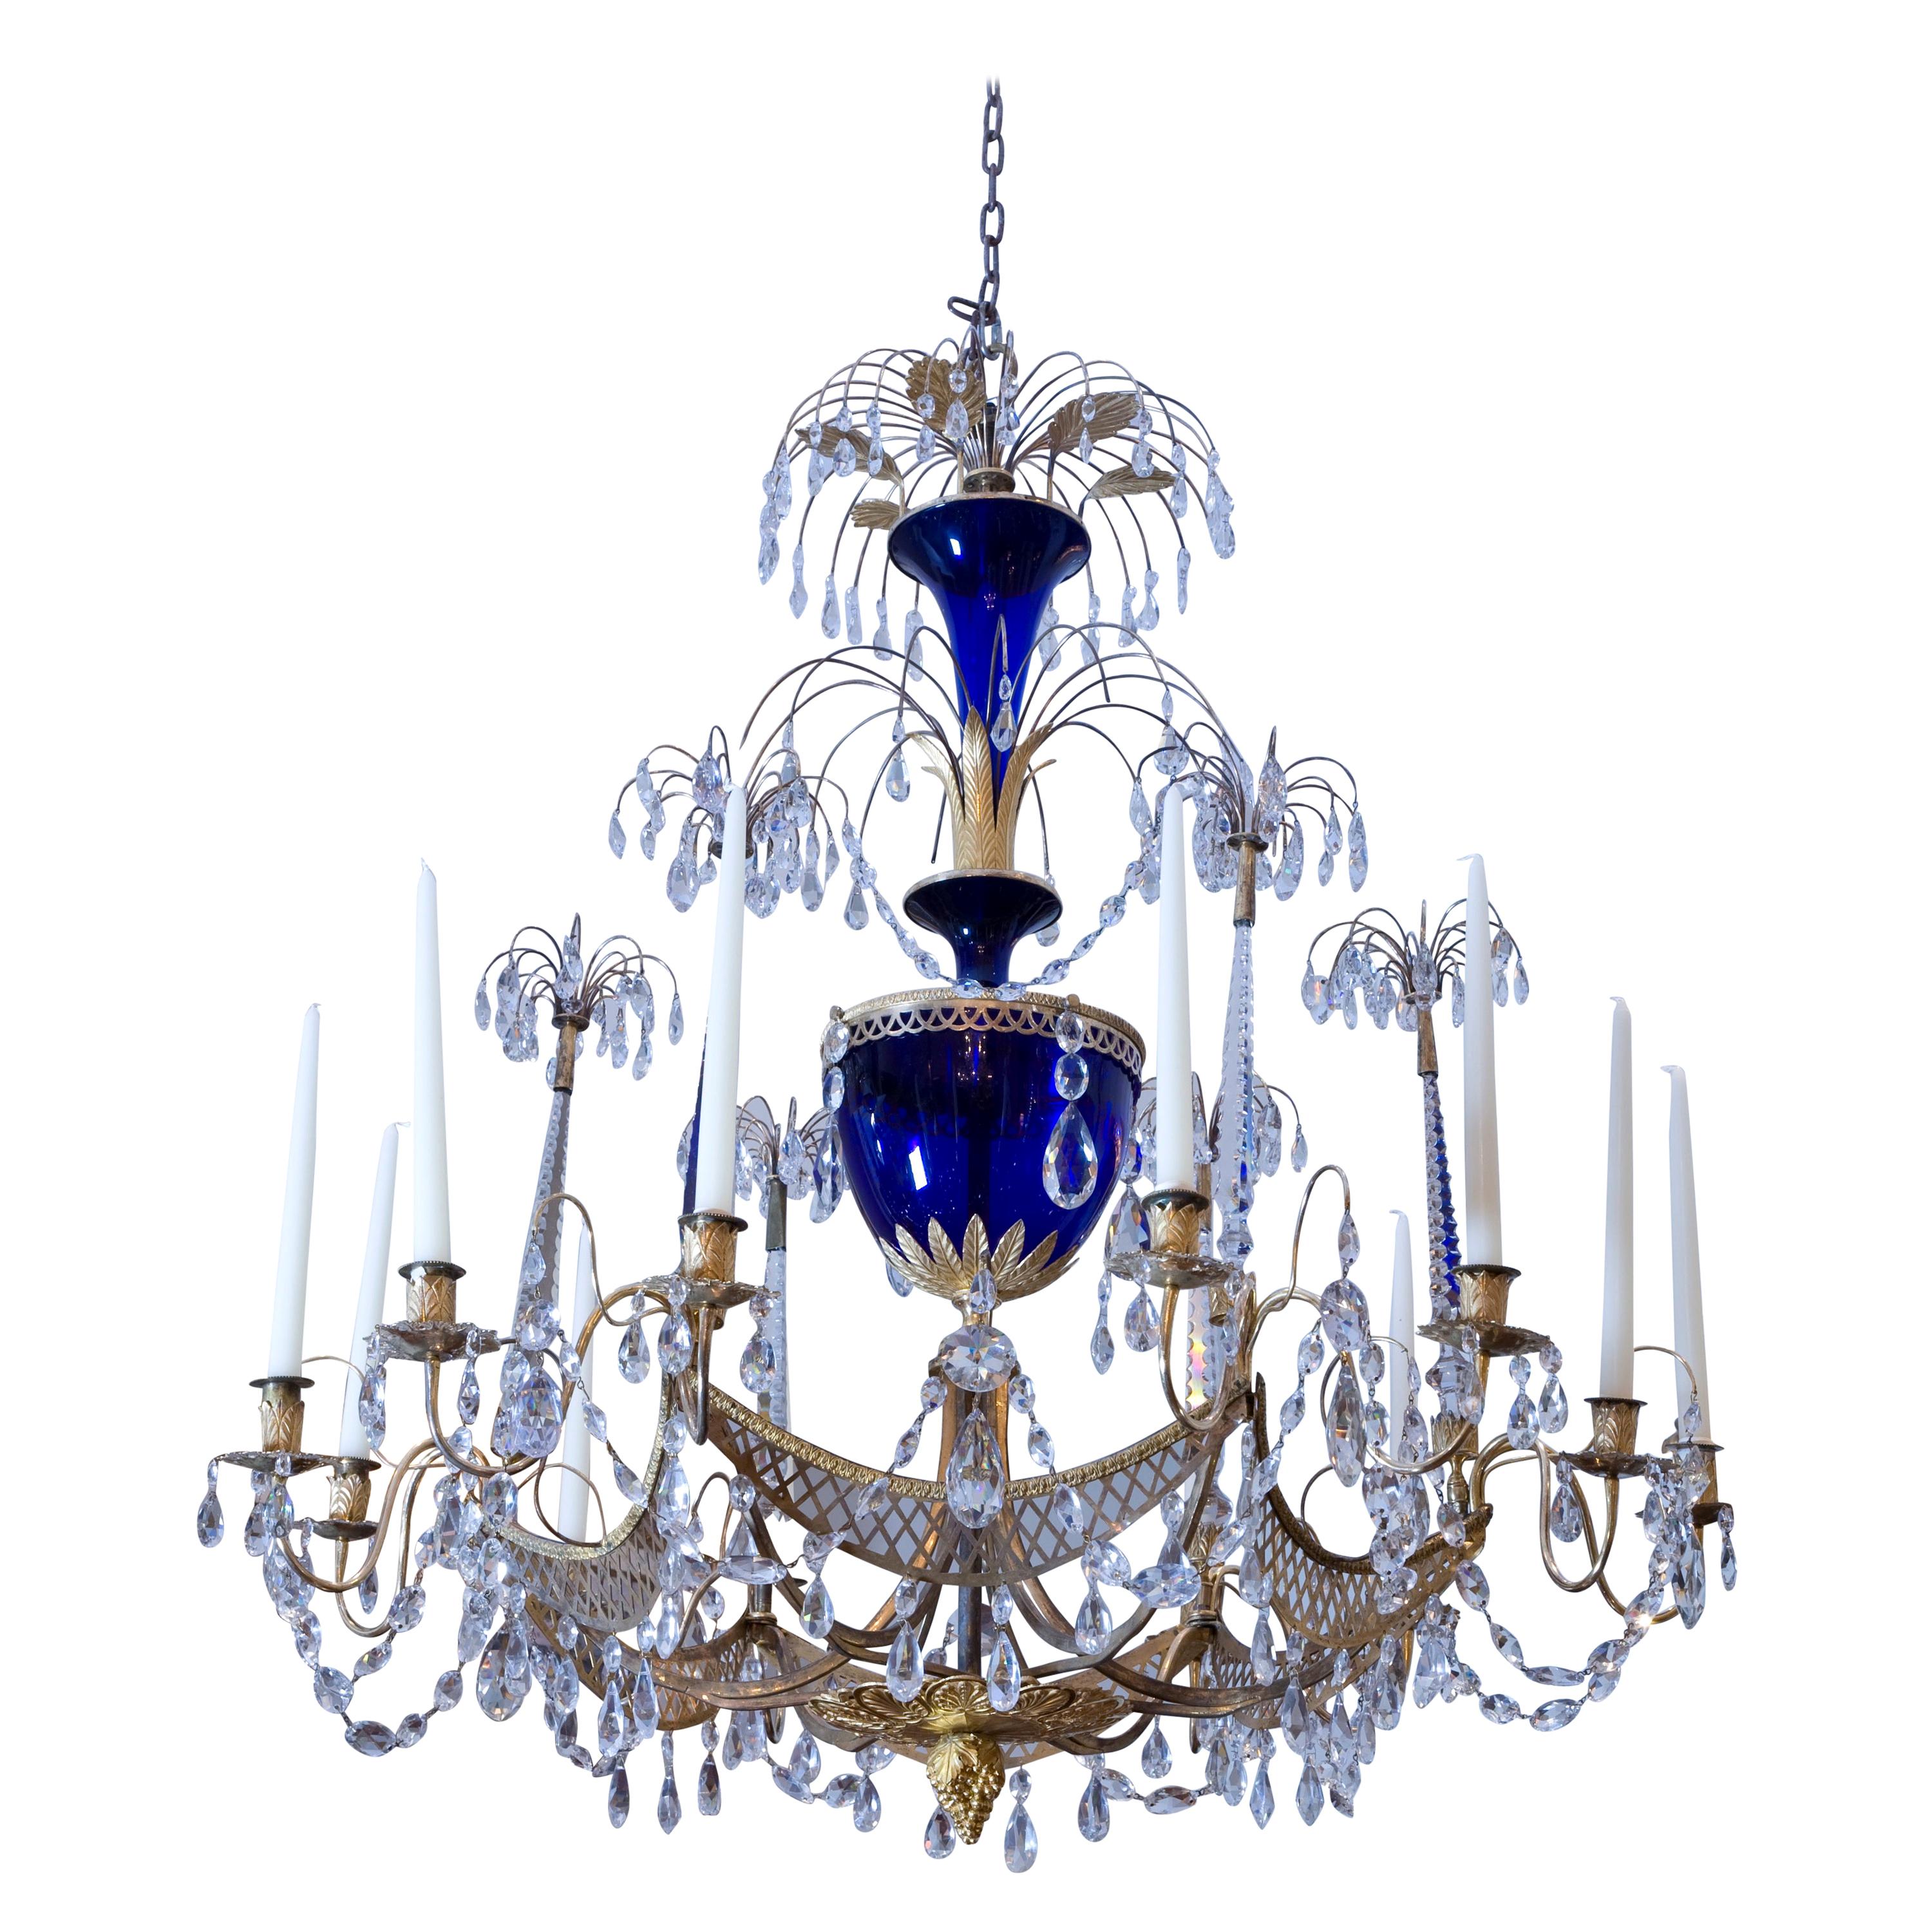 Russian Crystal, Cobalt Glass and Gilt Bronze Chandelier Attributed to Zekh